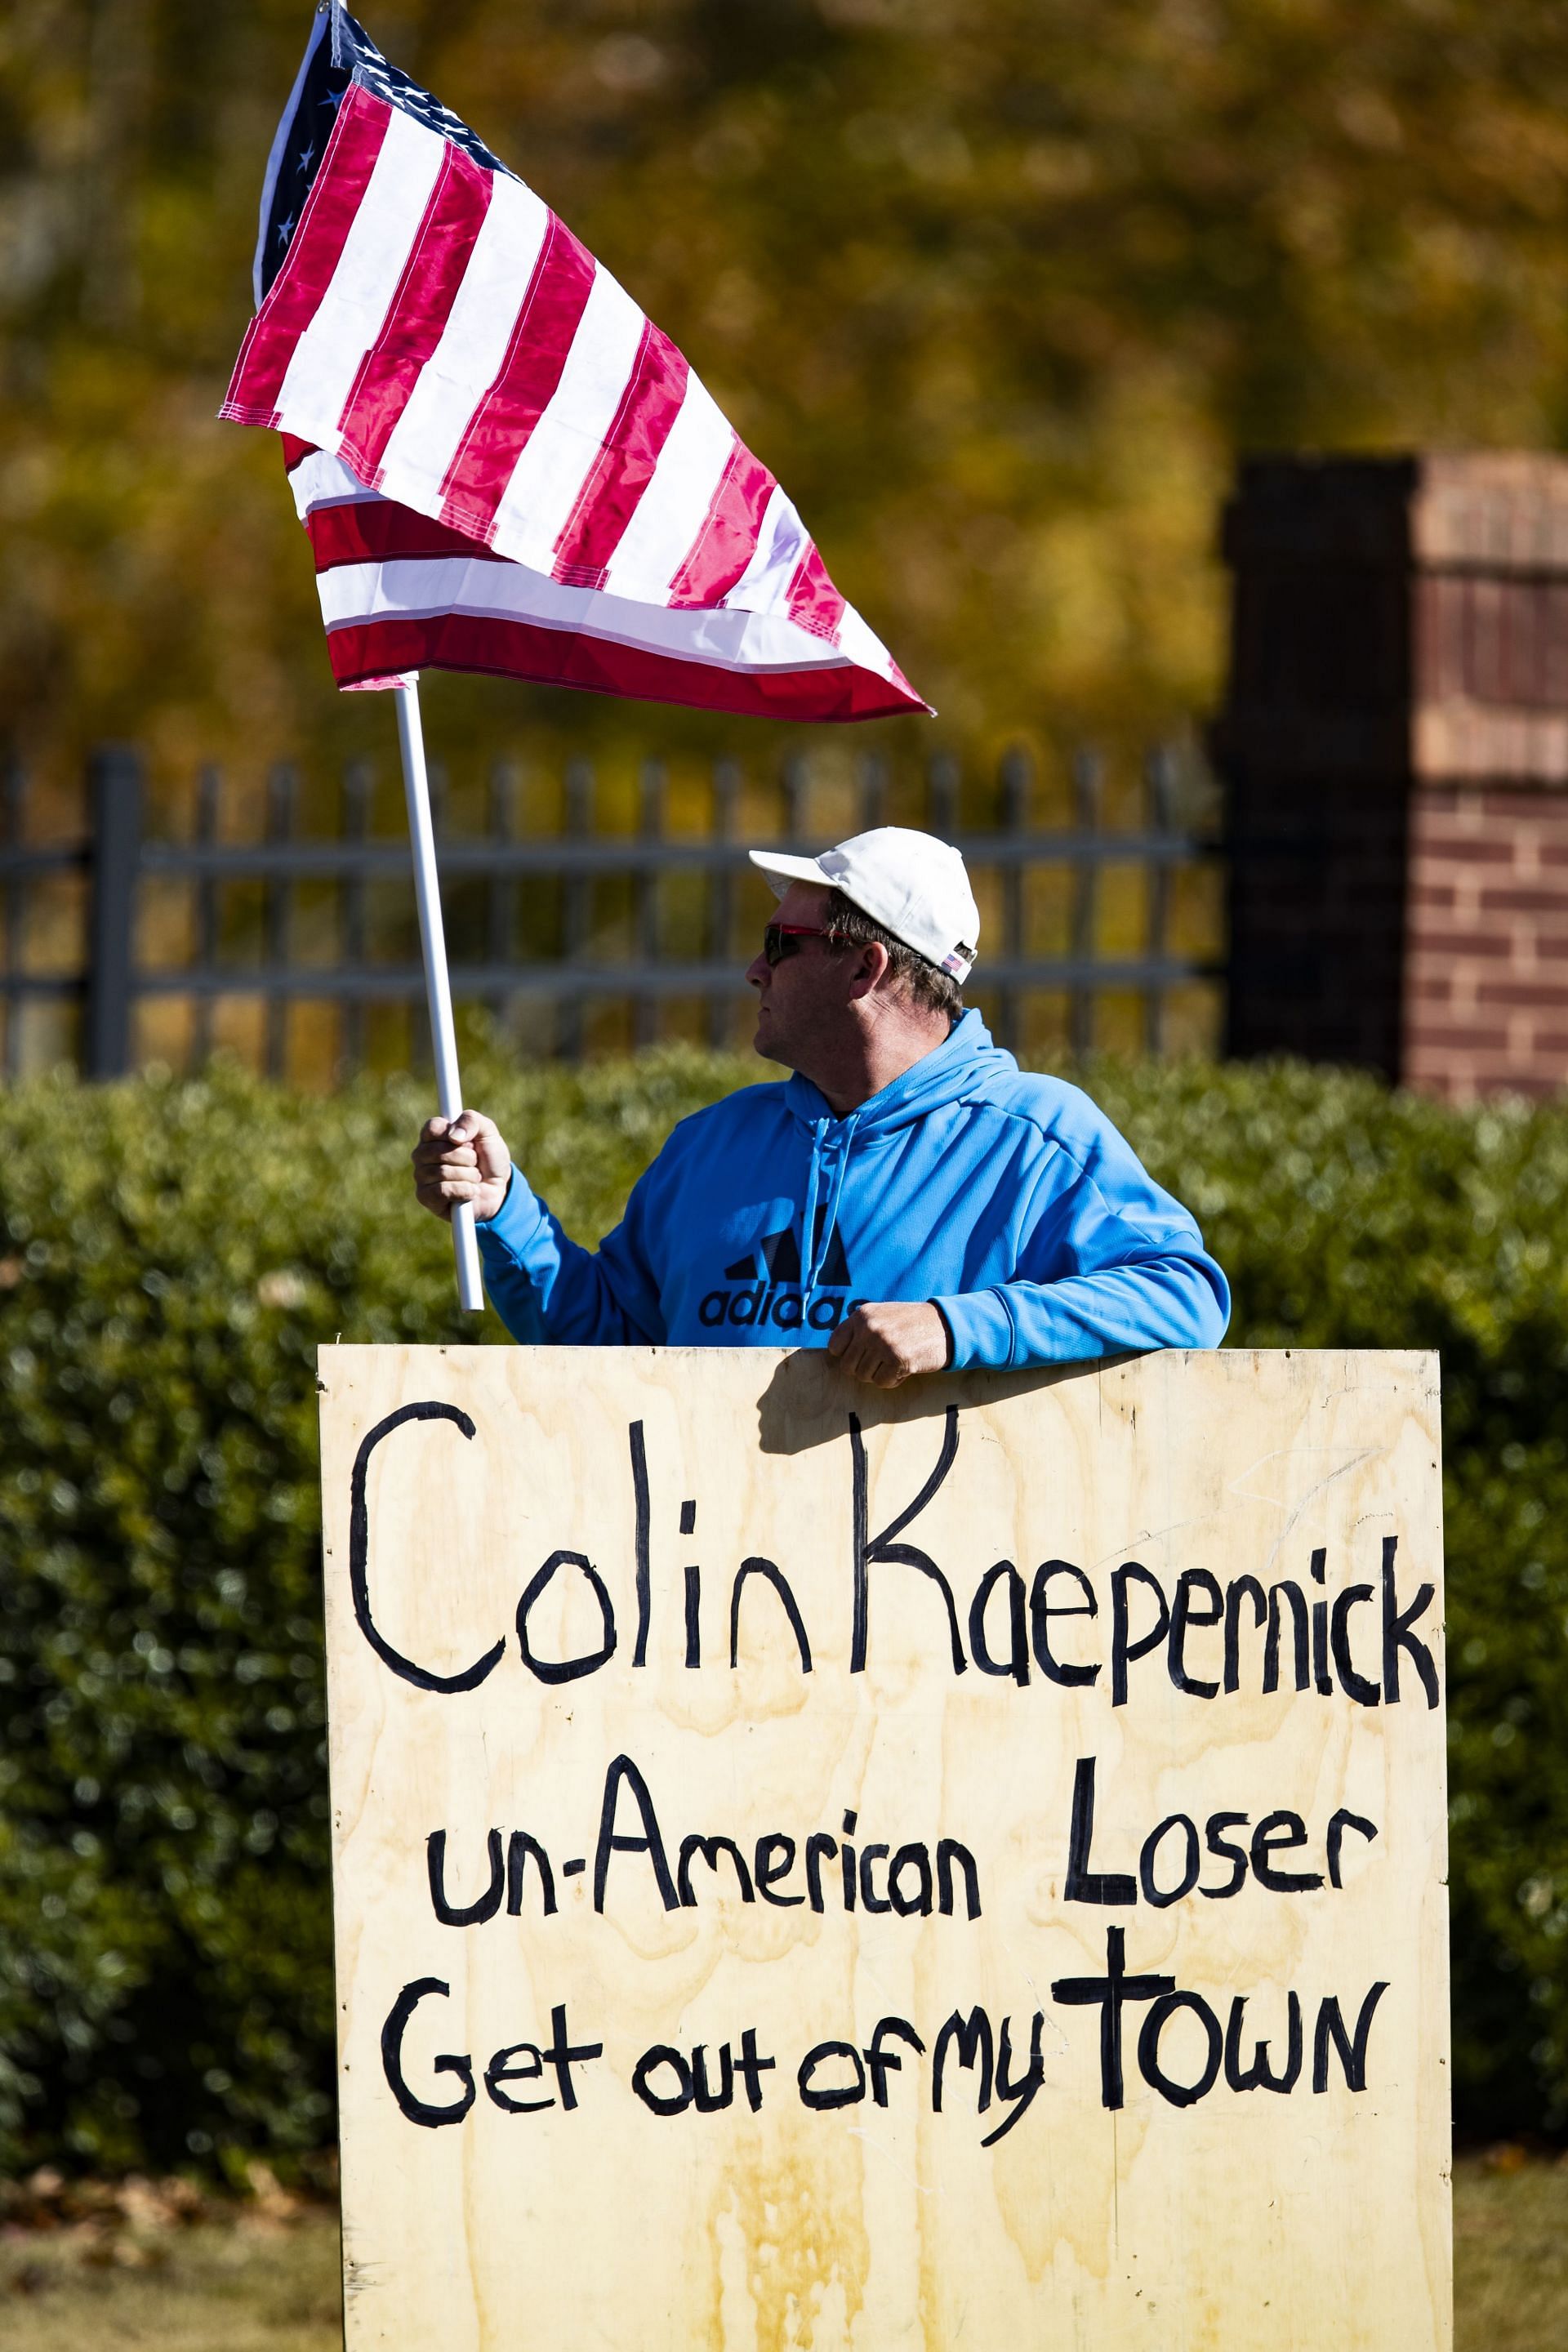 A man waits outside of the training facility where the Colin Kaepernick private NFL workout is being held on November 16, 2019, in Flowery Branch, Georgia